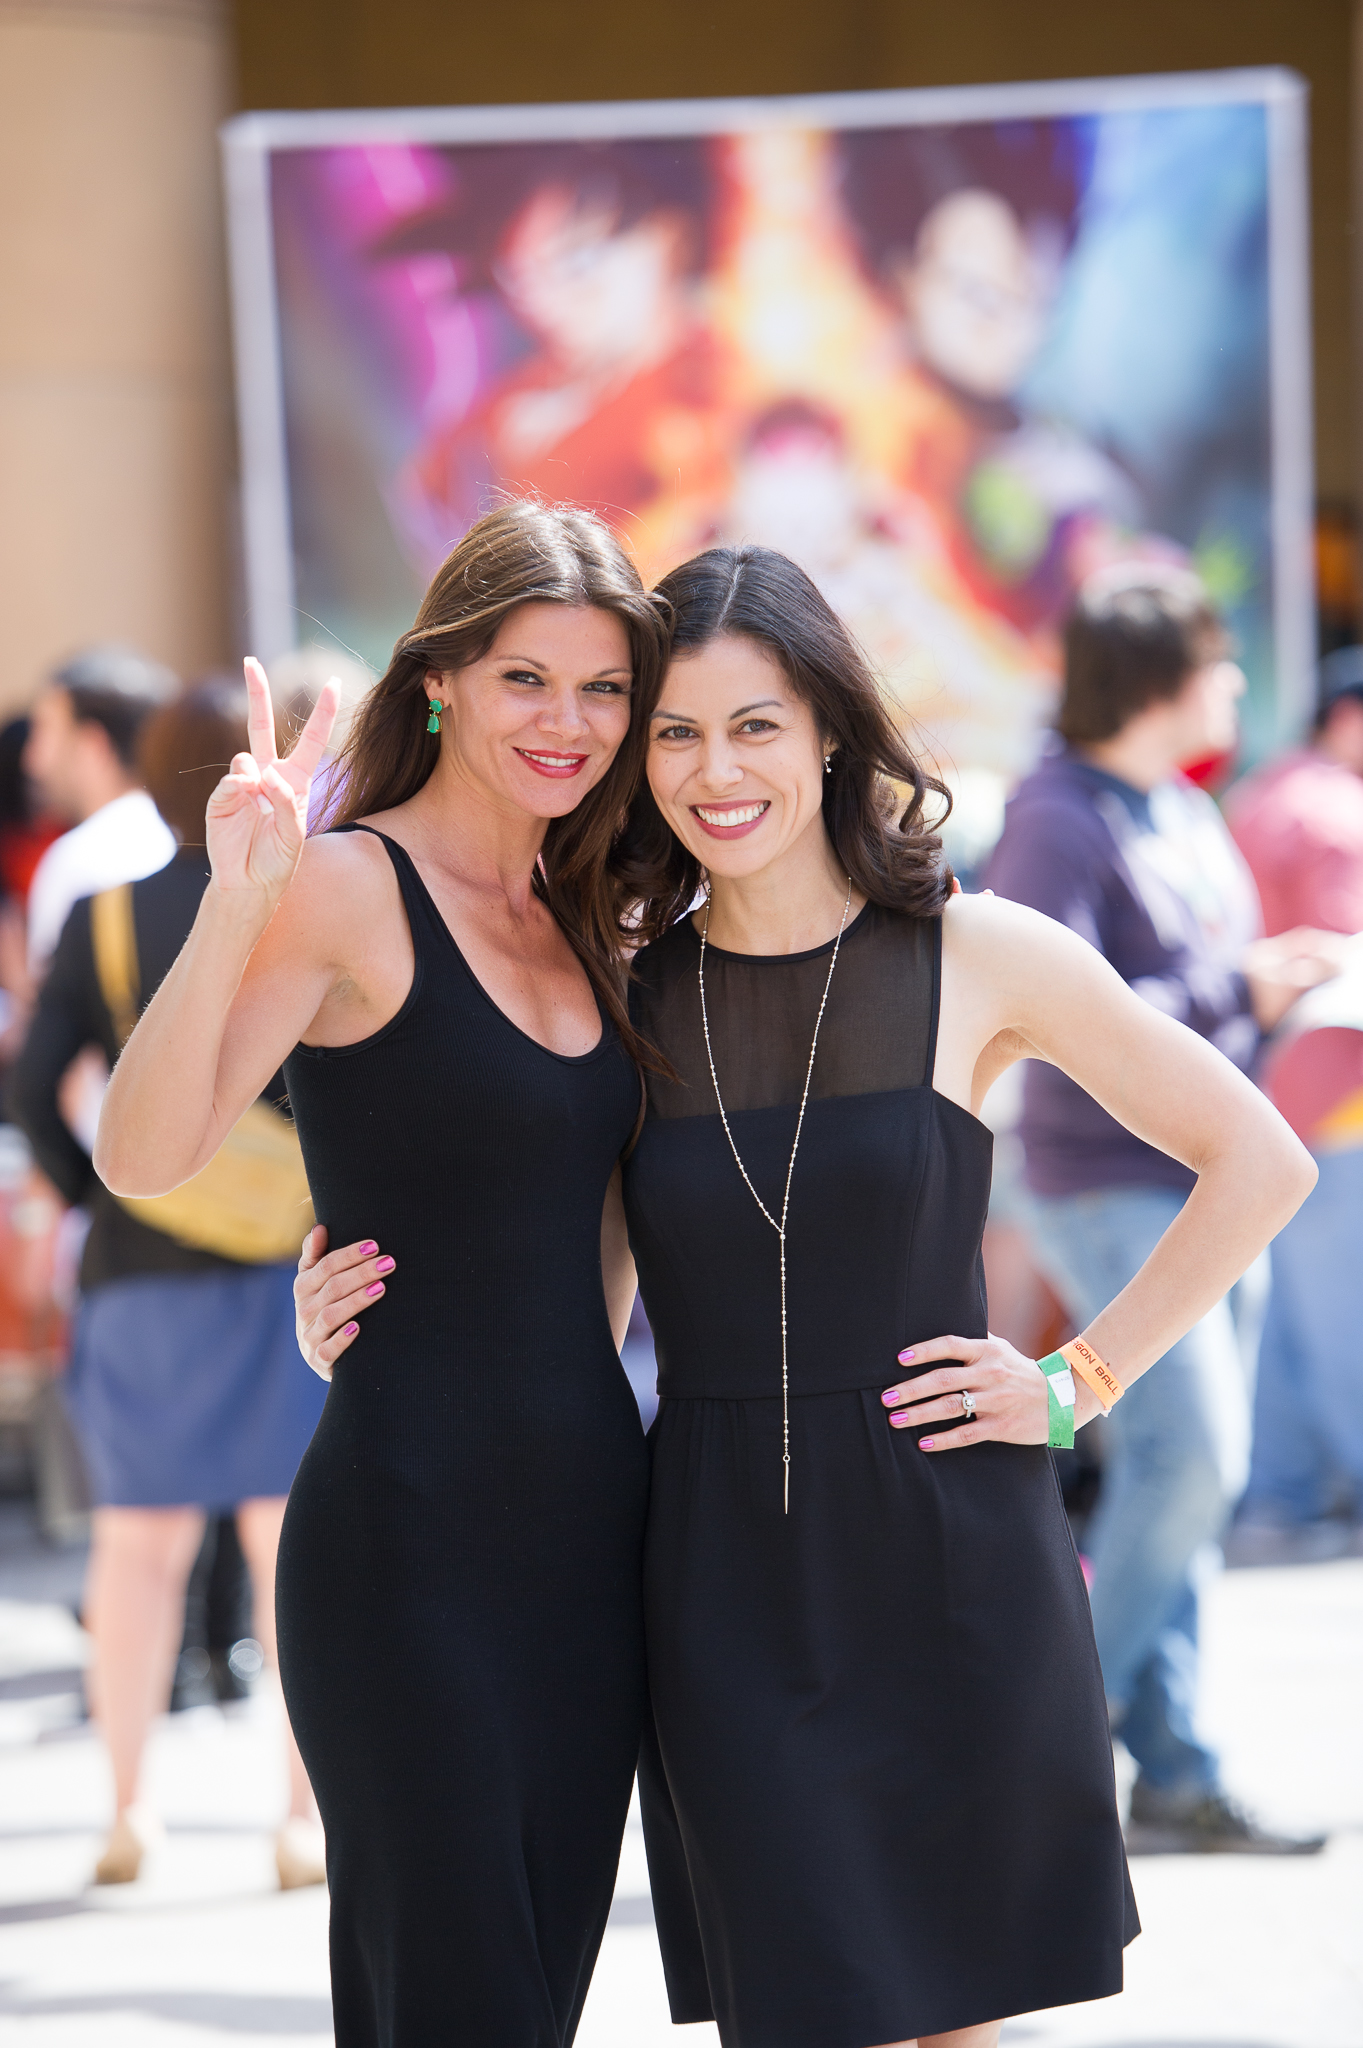 Actress Casey Dacanay and actress Danielle Vasinova arrive for the premiere of 'Dragon Ball Z: Resurrection 'F'' at the Egyptian Theatre on April 11, 2015 in Hollywood, Calif.